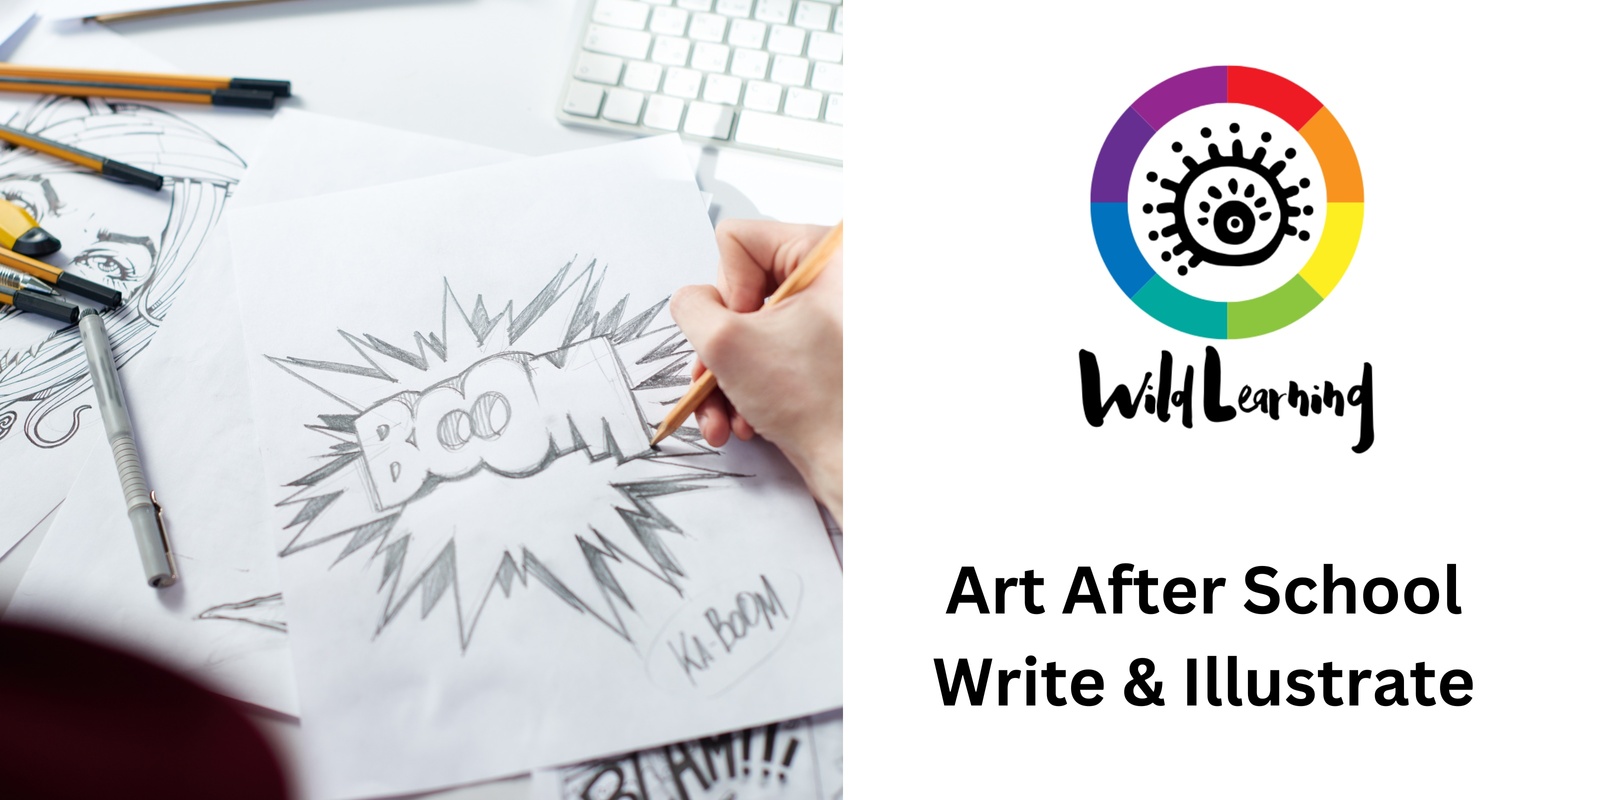 Banner image for Afterschool classes - Write & Illustrate